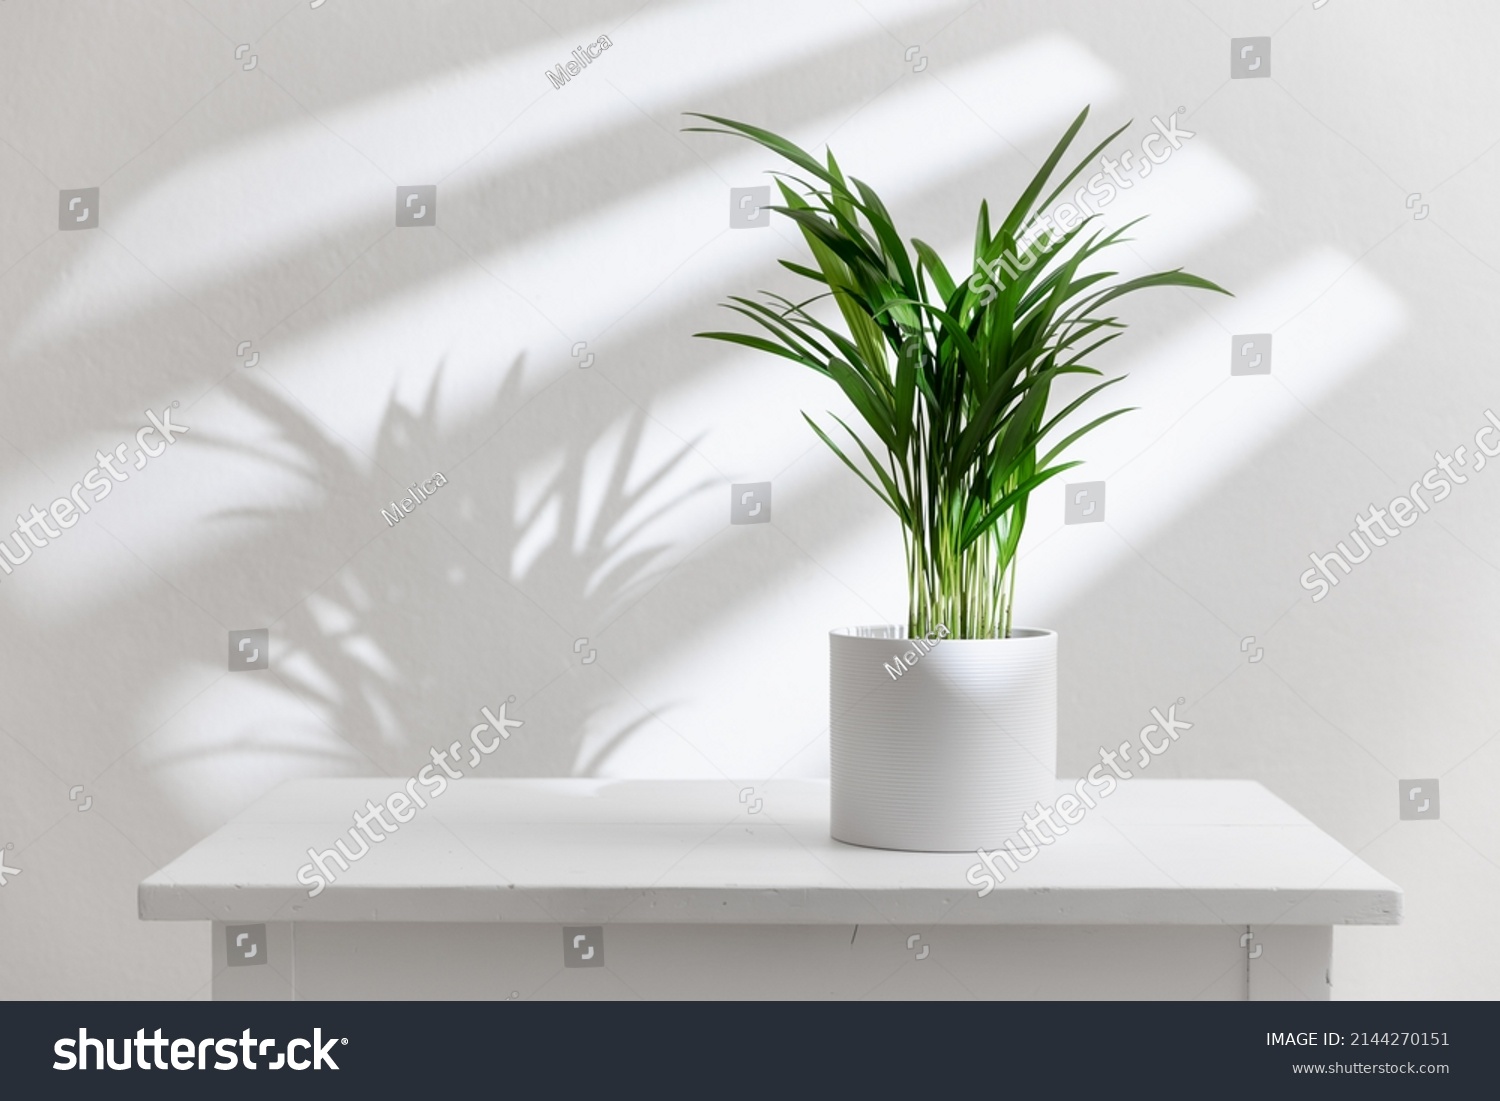 Potted indoor plant on white table. Decorative Areca palm (Dypsis lutescens). #2144270151